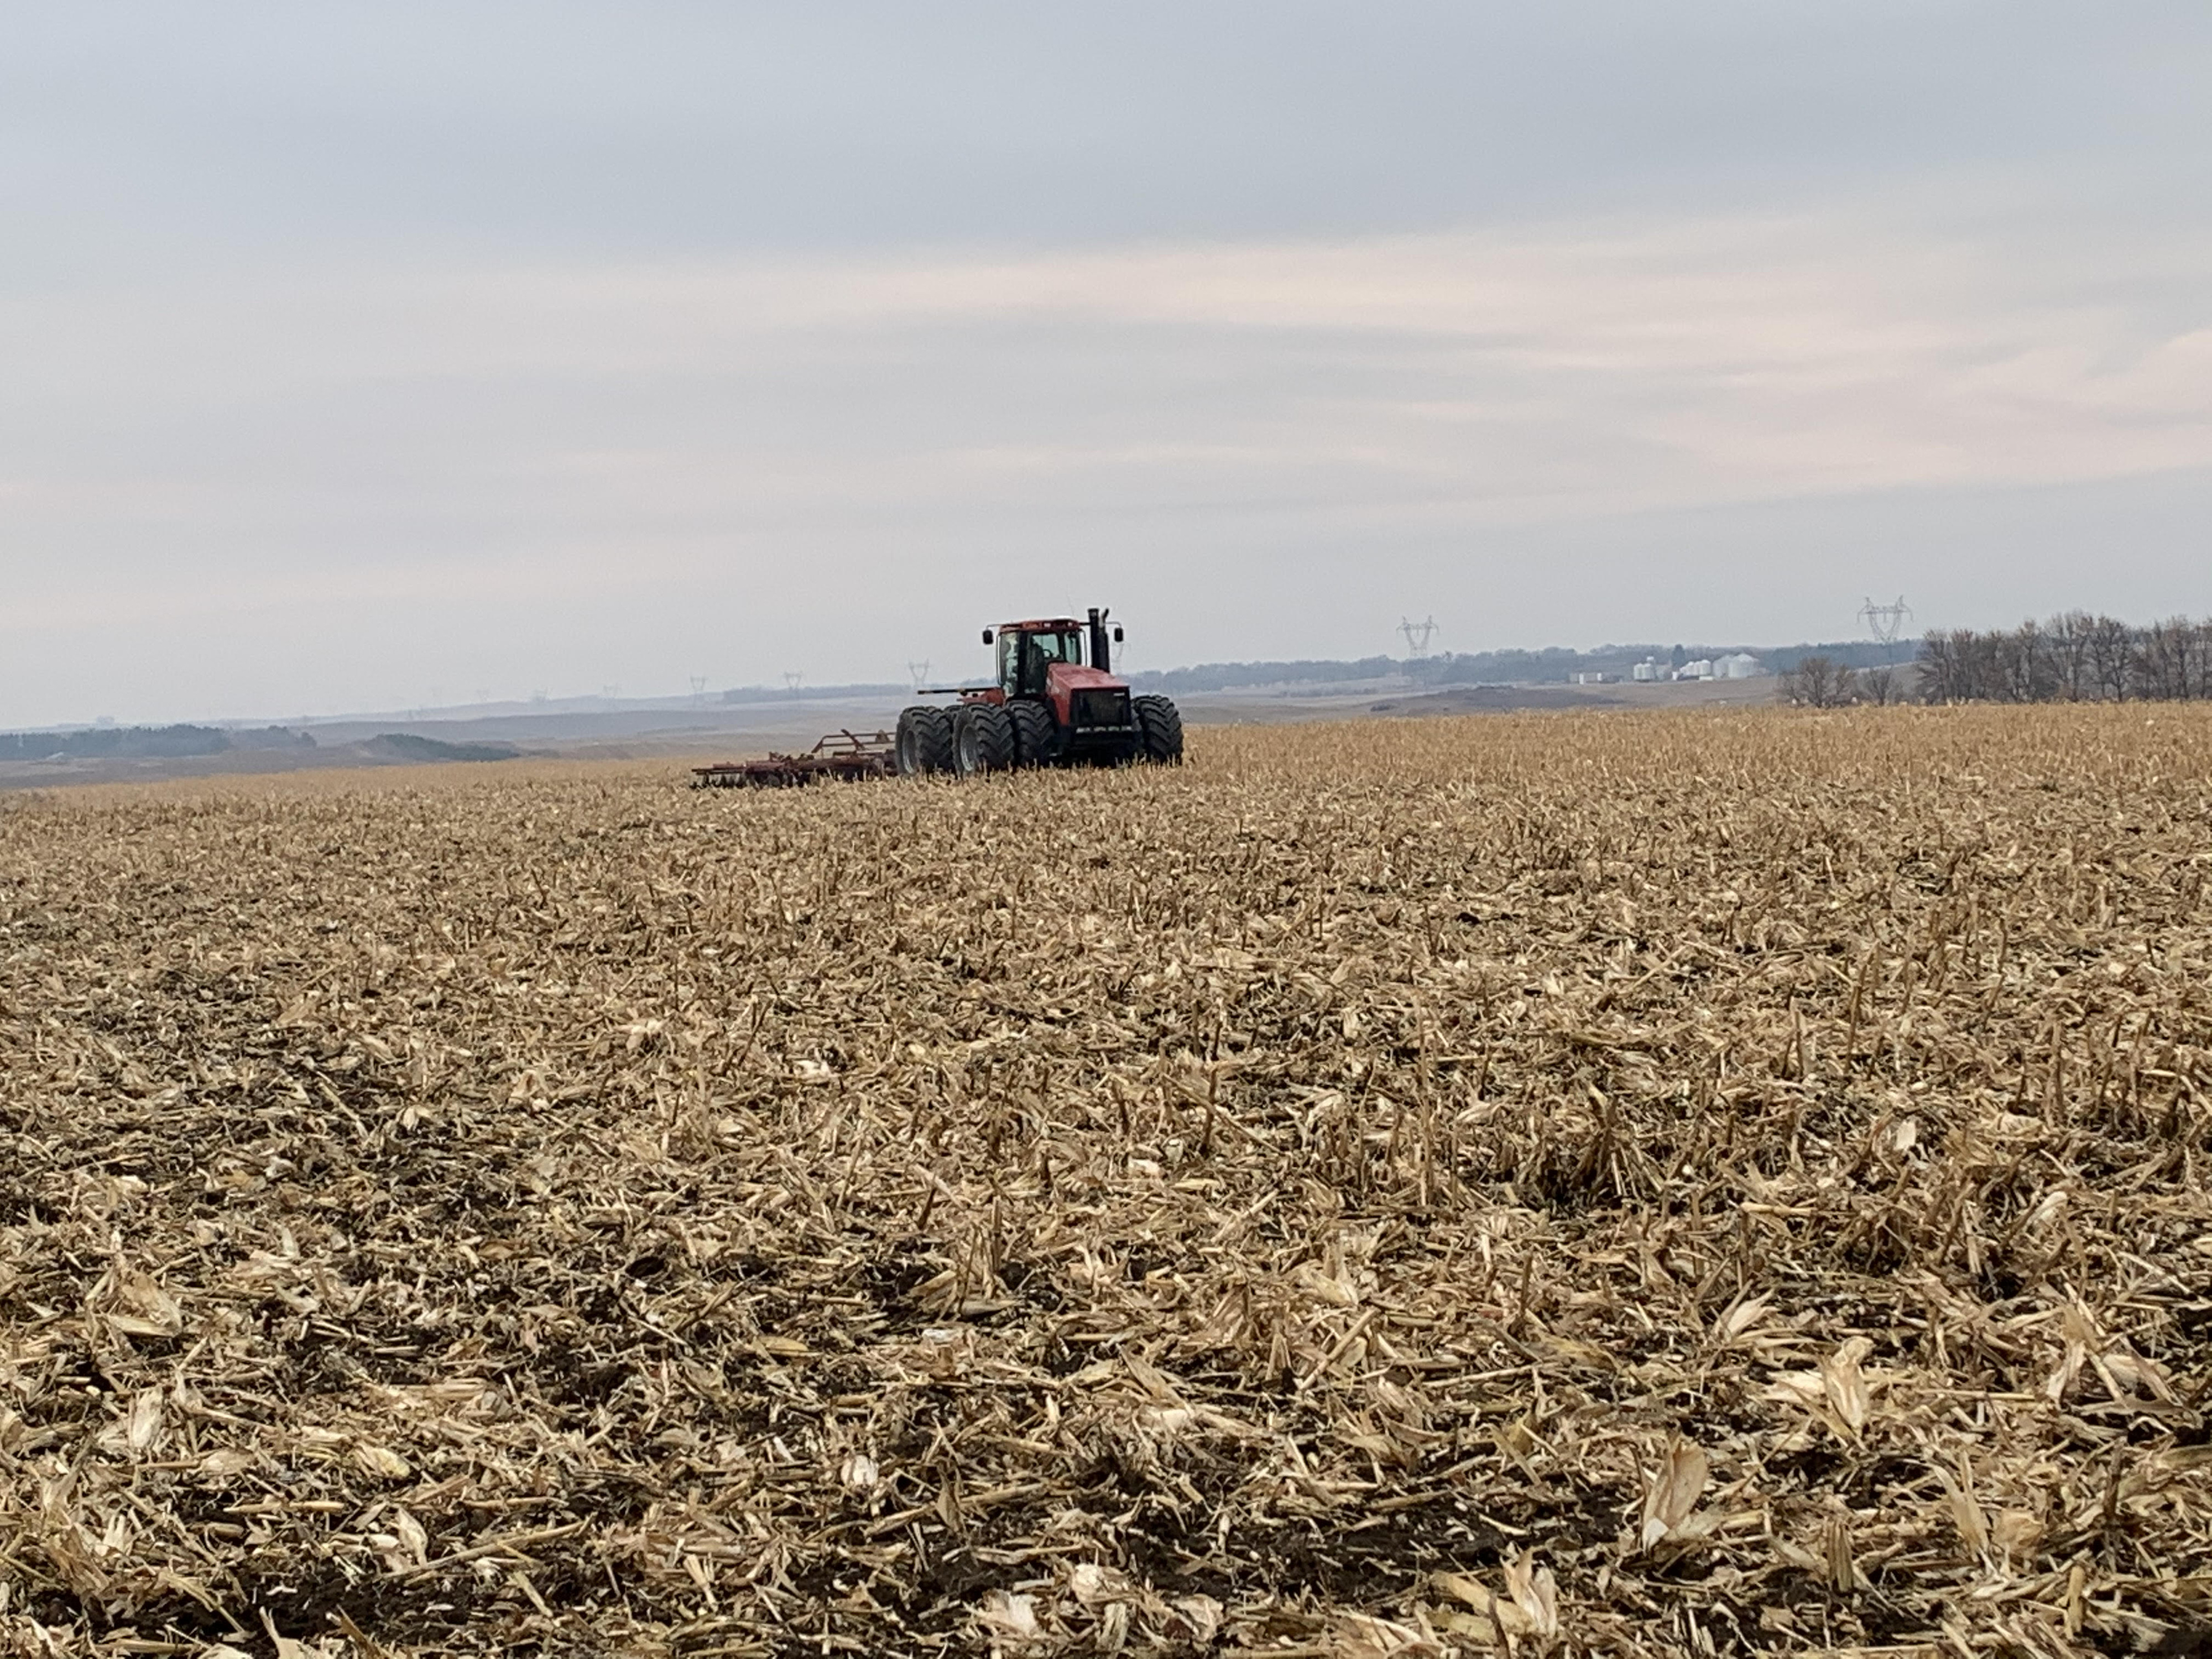 Afternoon Ag News, August 3, 2021: 2020 North Dakota farm and ranch production expenses down from 2019